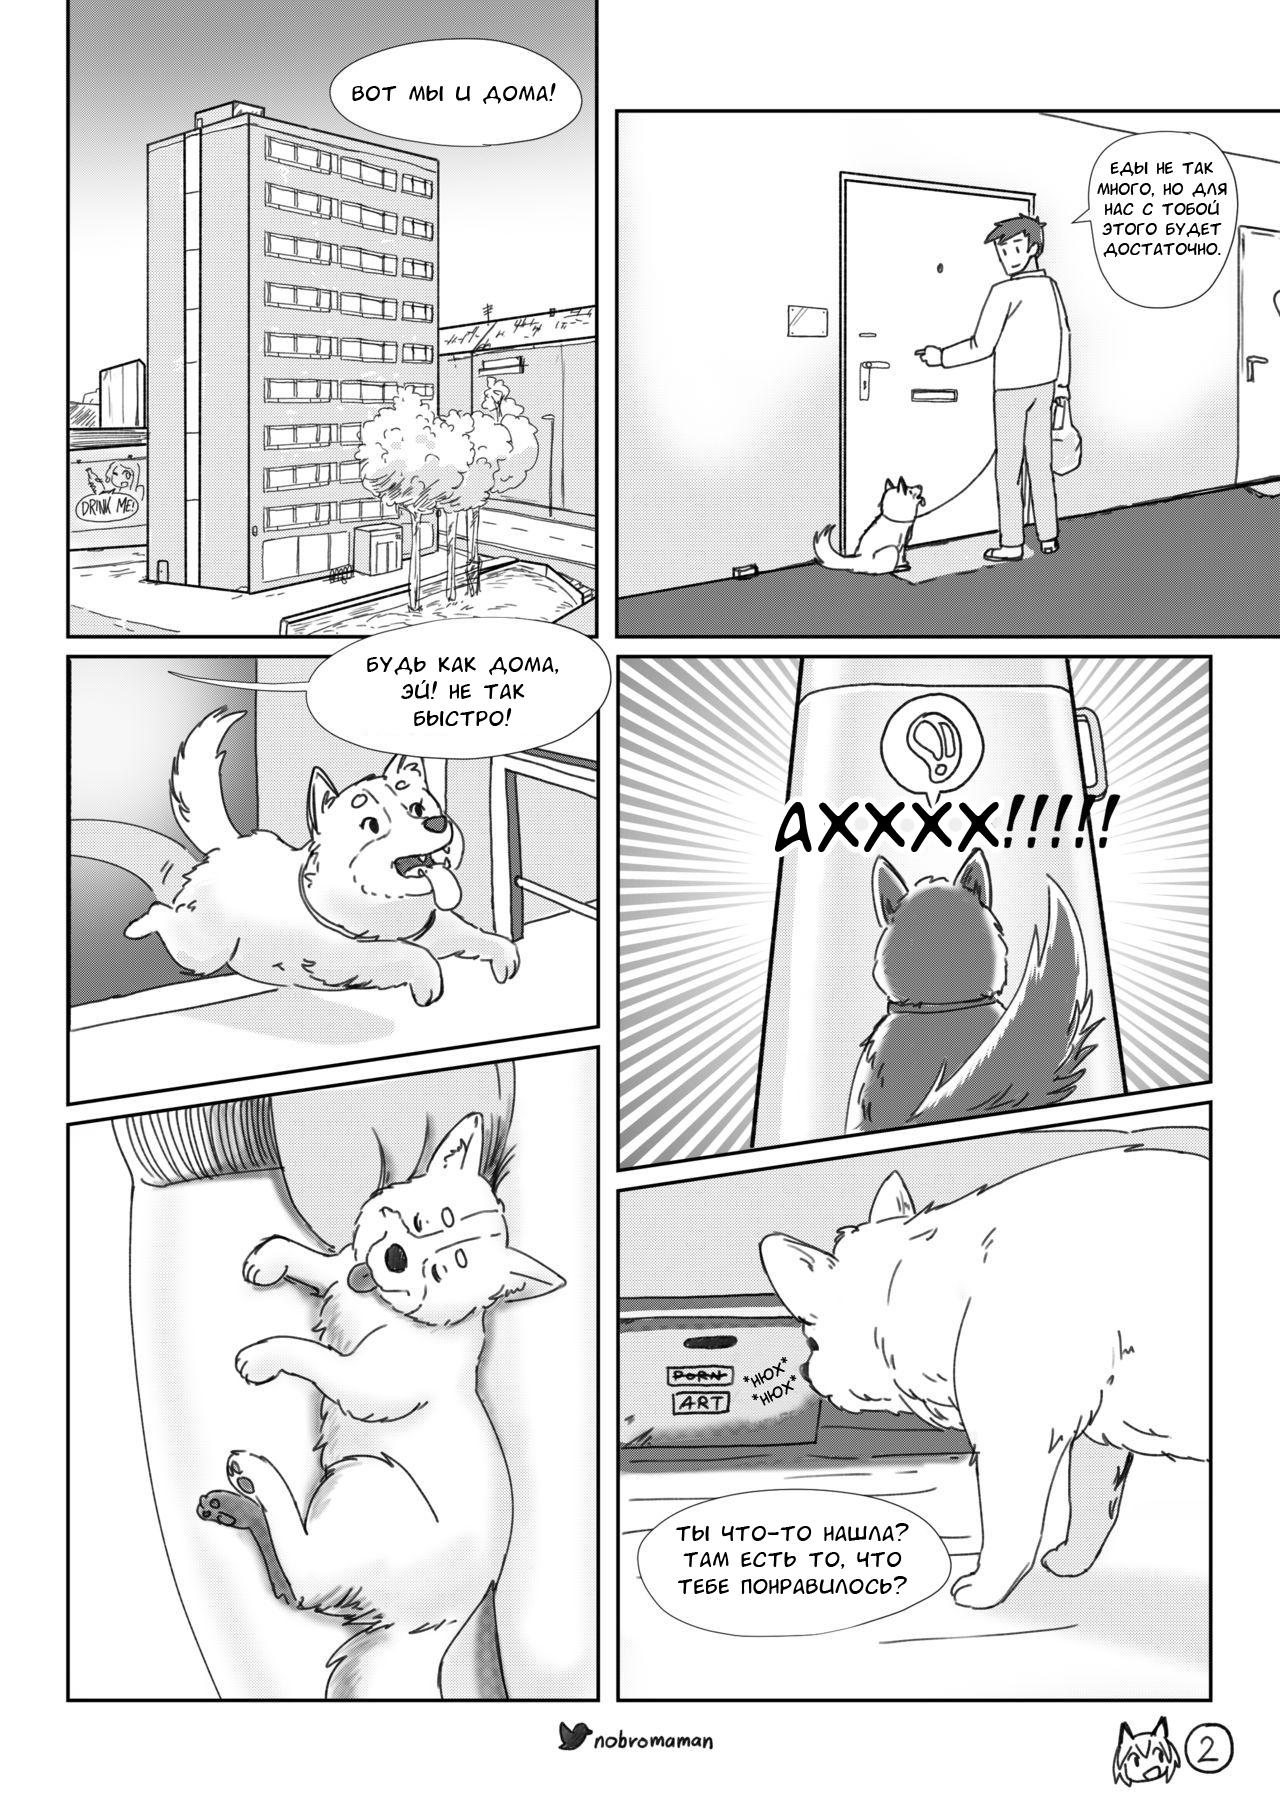 Life with a dog girl - Chapter1 - Page 3 - Comic Porn XXX